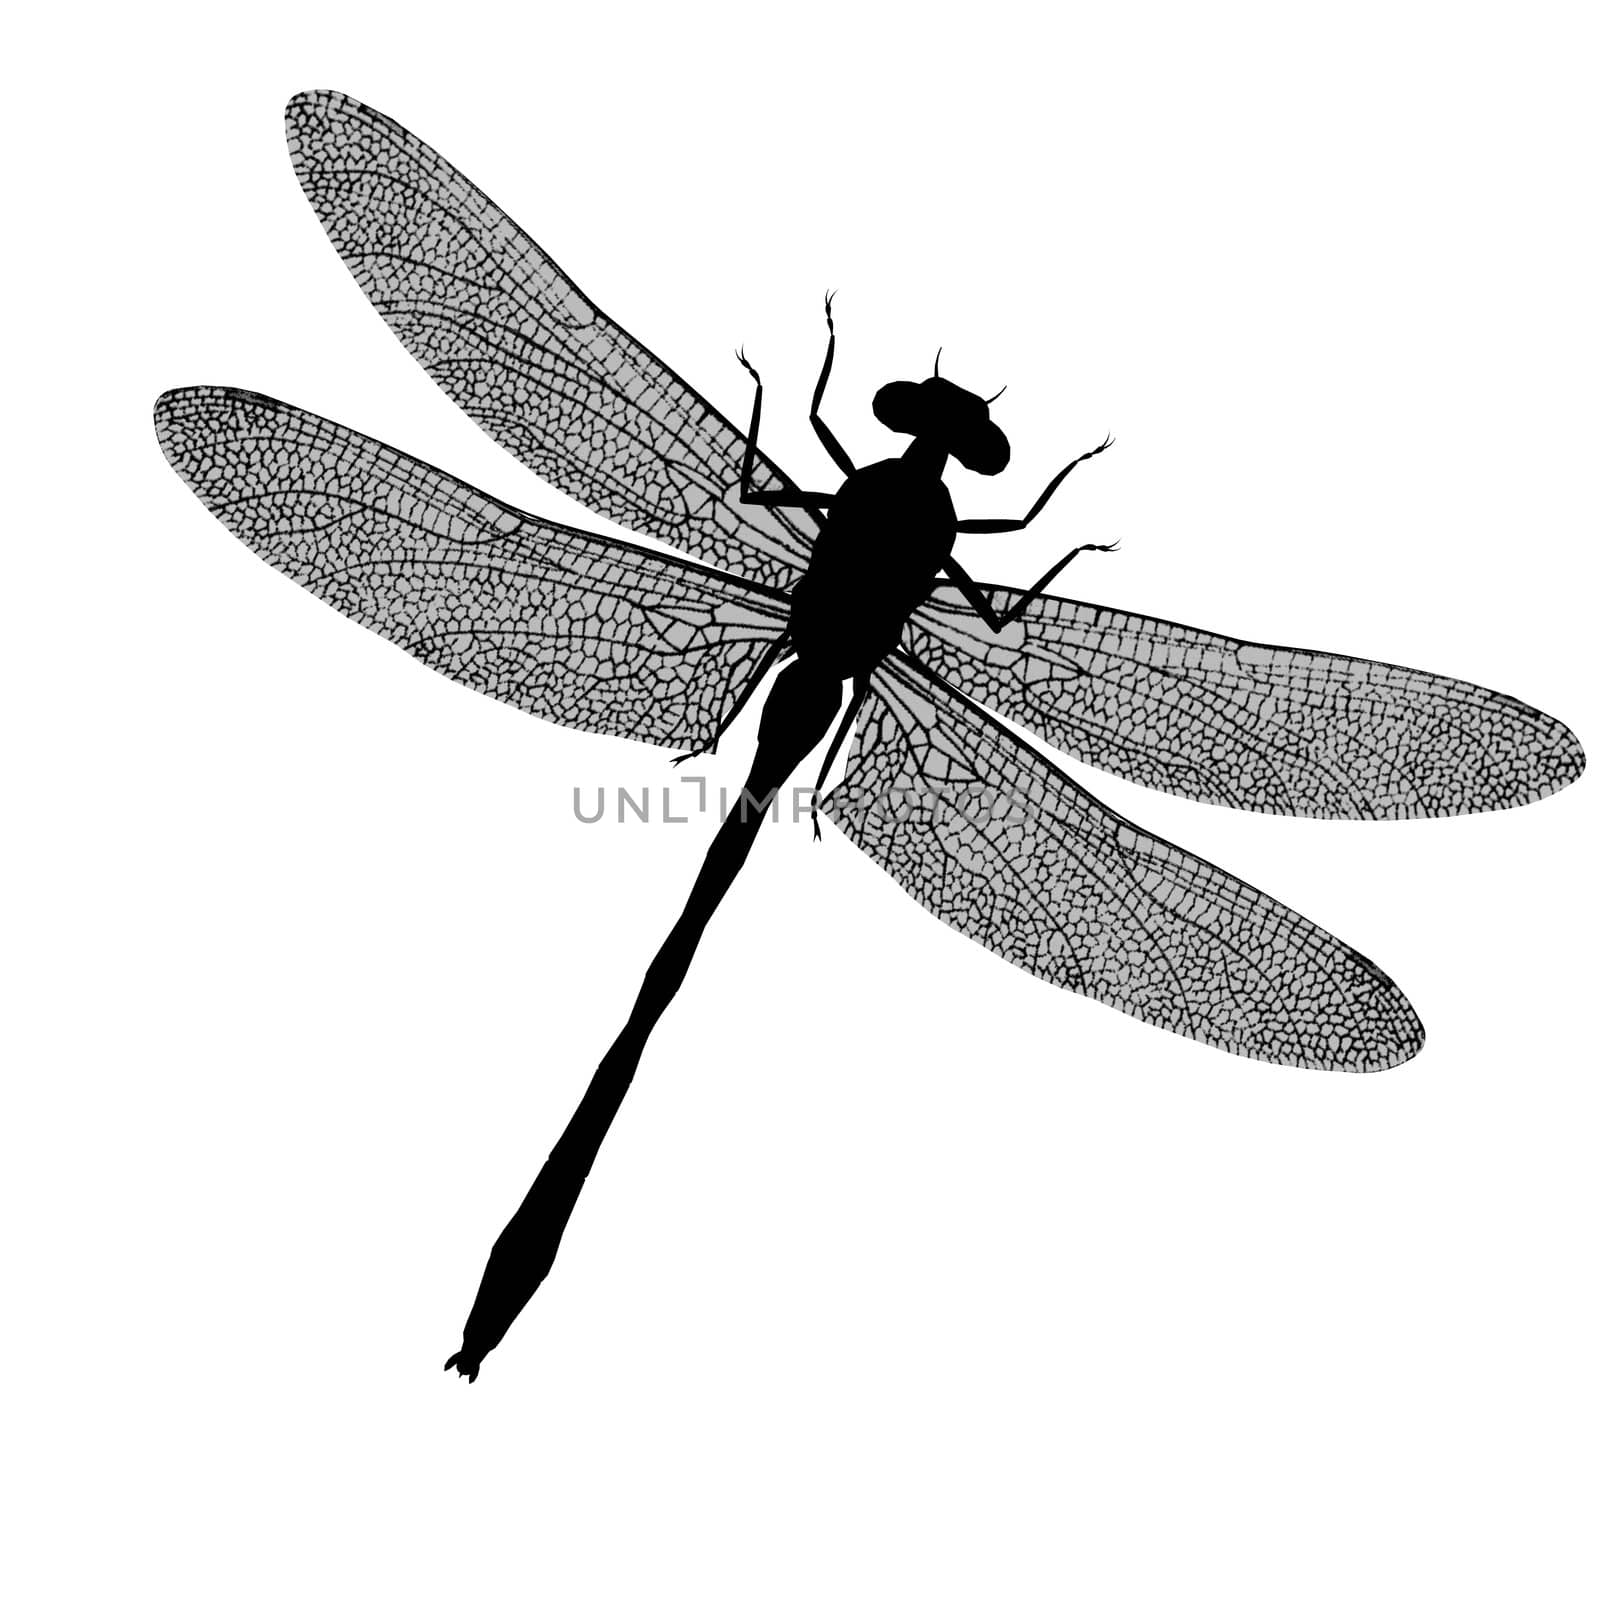 Dragonfly Silhouette by kathygold